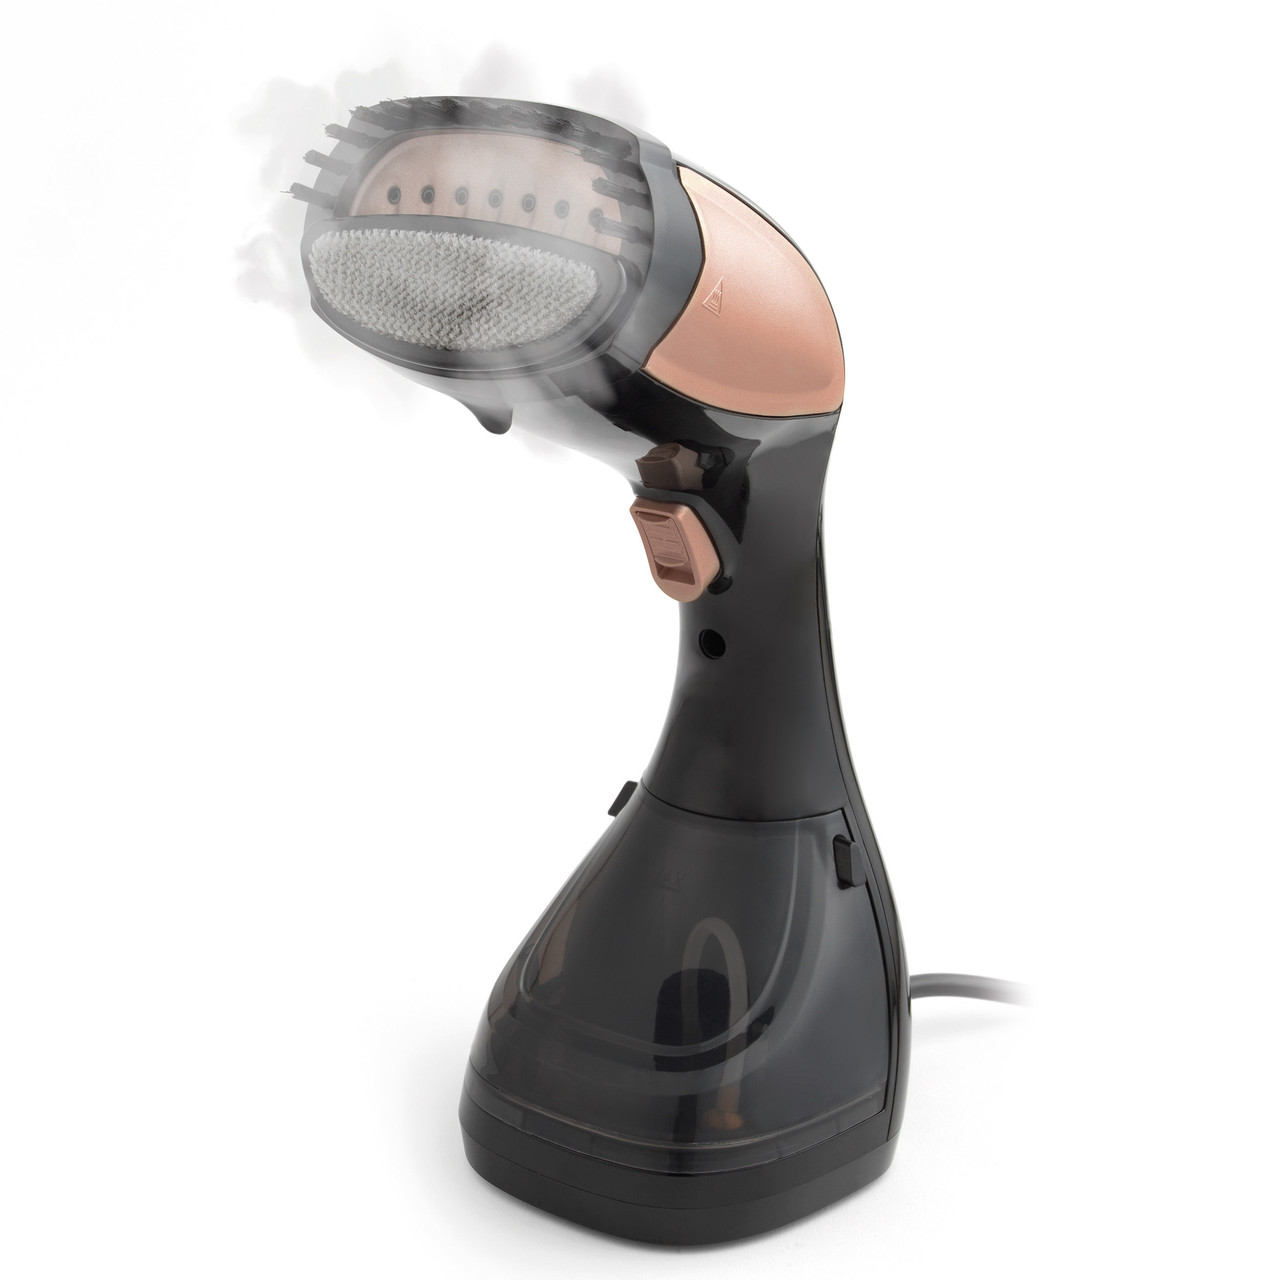 2-in-1 Handheld Garment Steamer – National Product Review